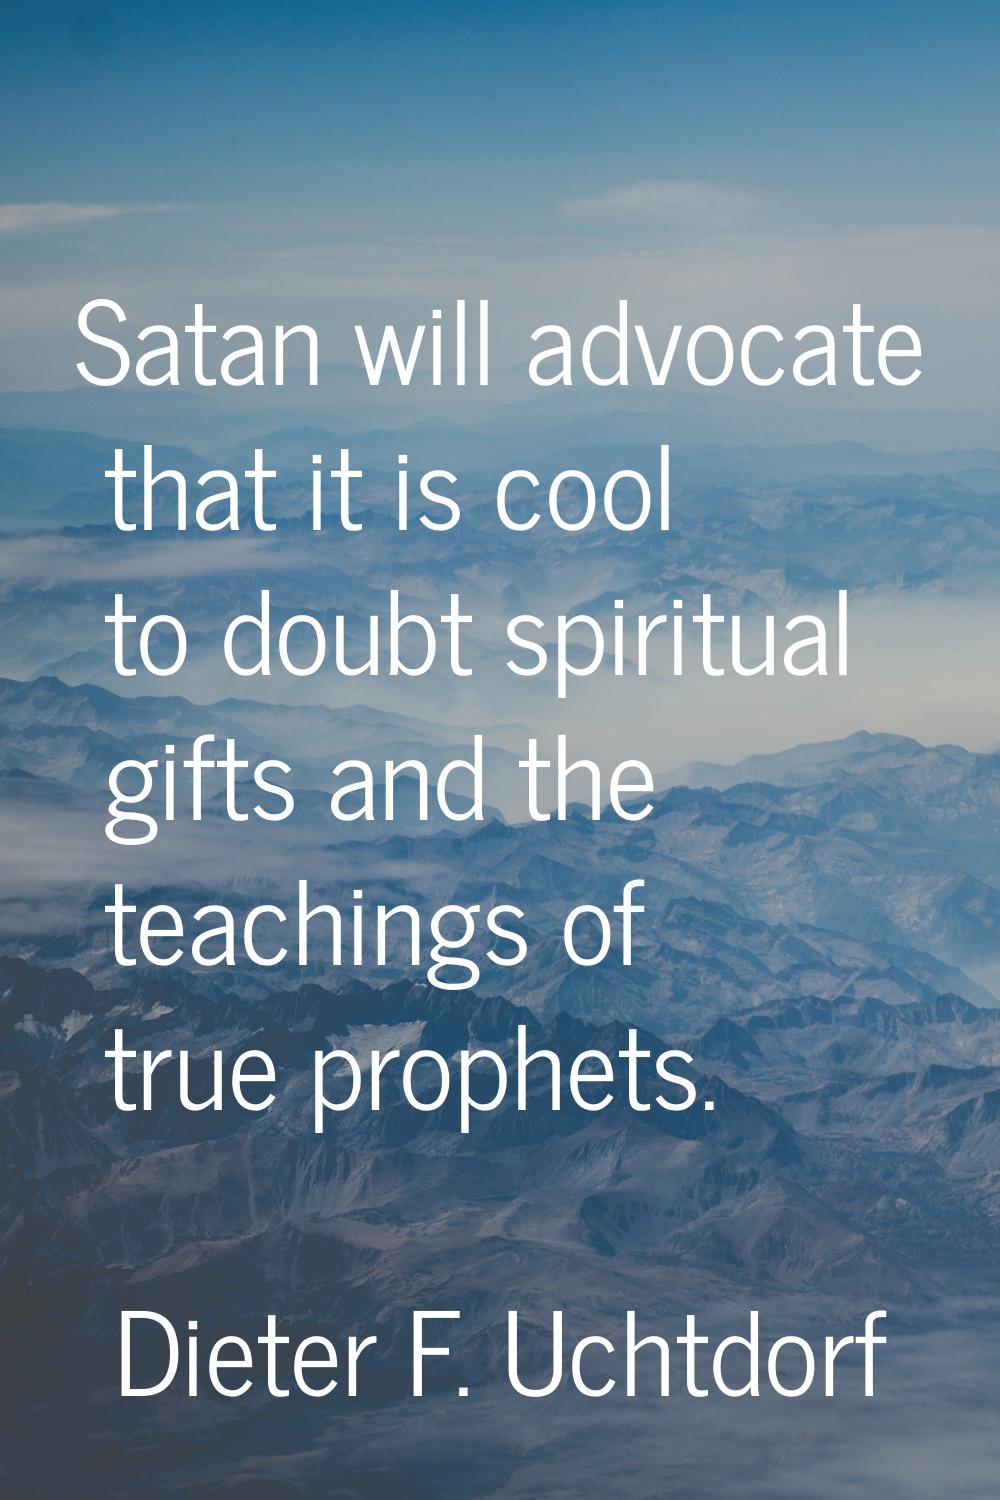 Satan will advocate that it is cool to doubt spiritual gifts and the teachings of true prophets.